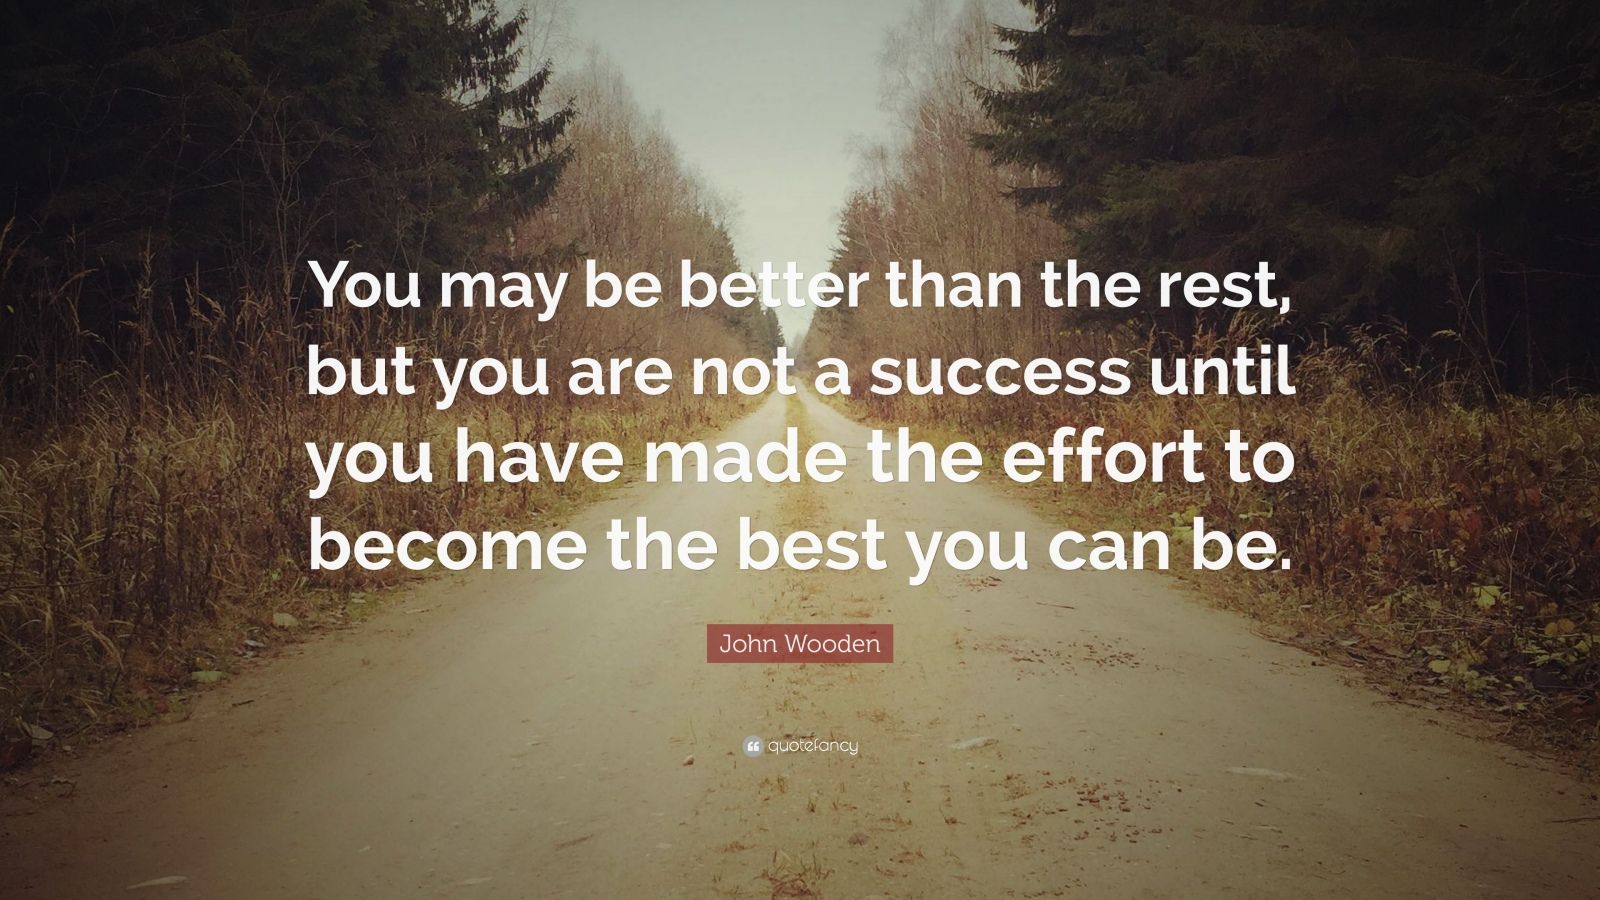 John Wooden Quote: “You may be better than the rest, but you are not a ...